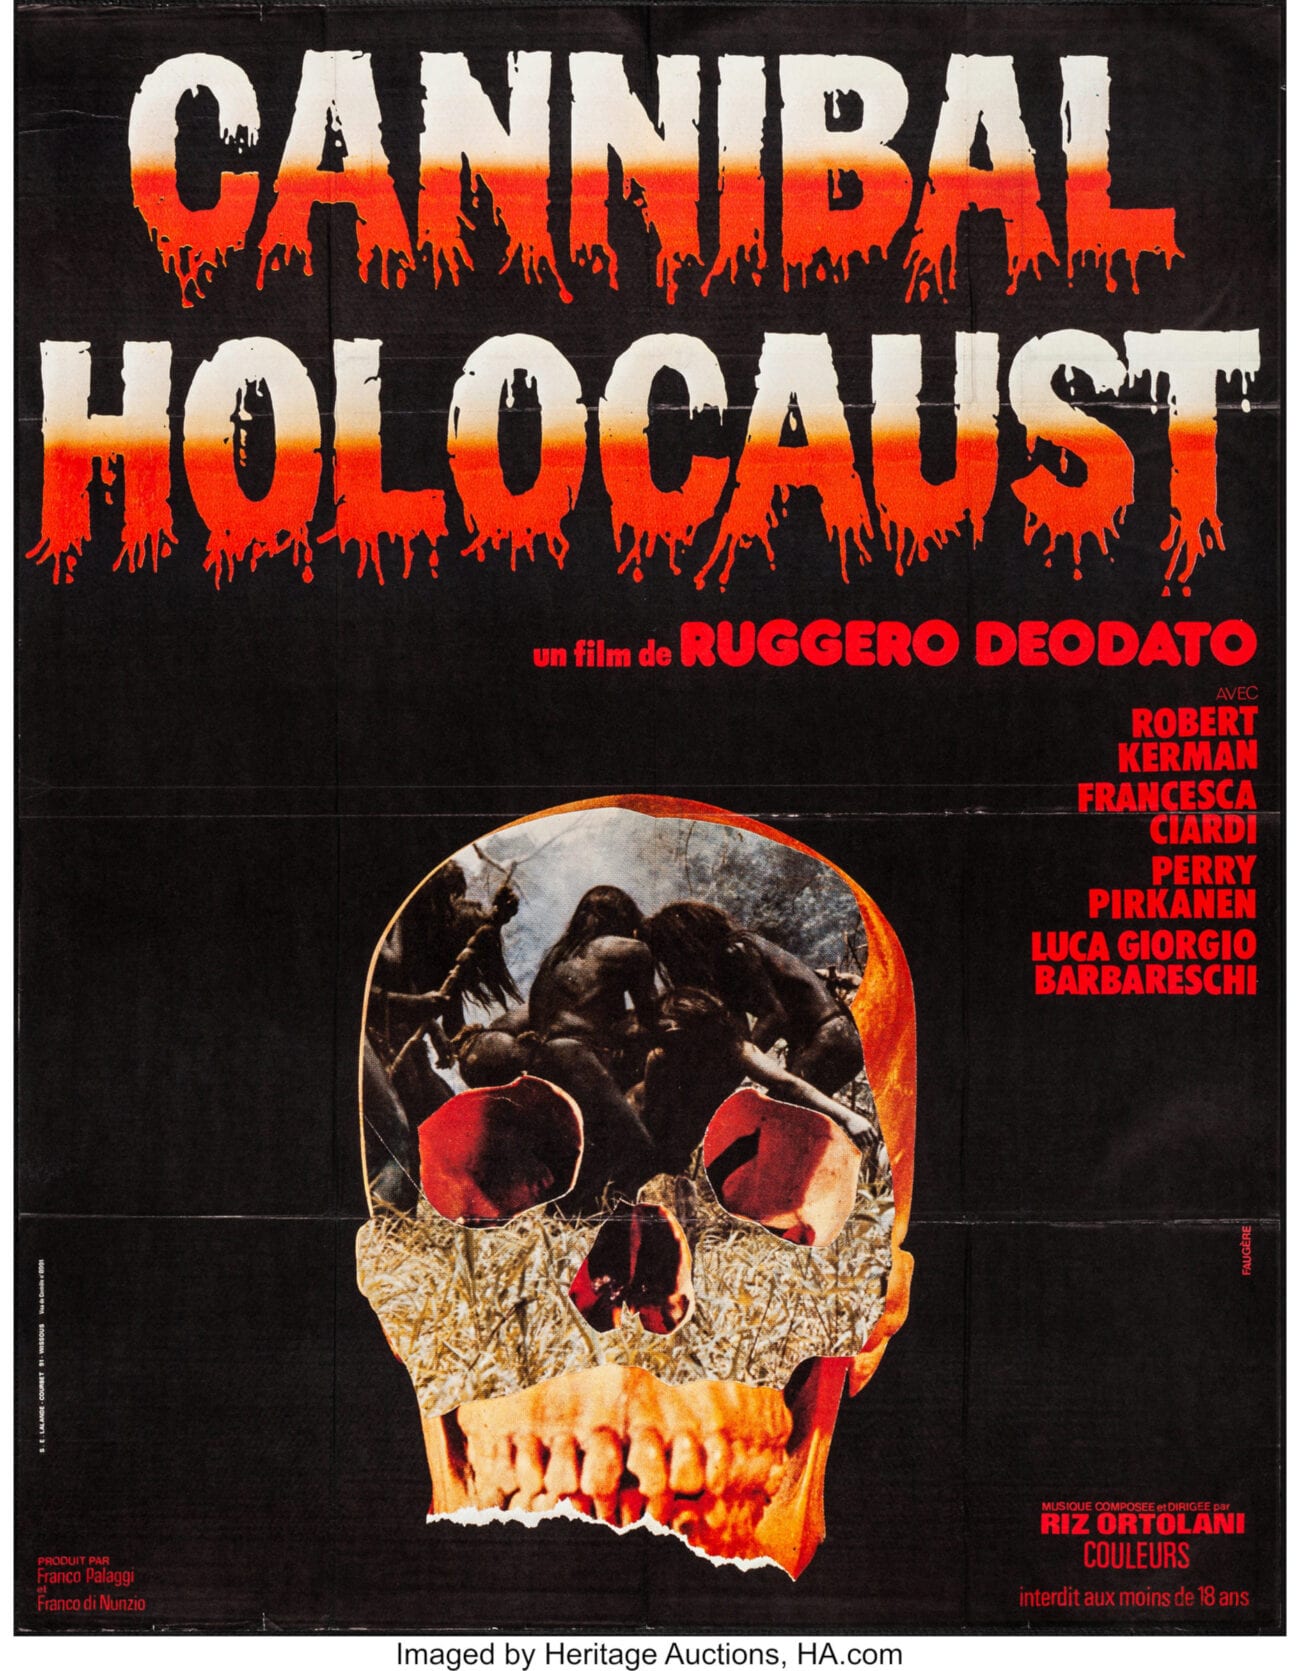 The cult film 'Cannibal Holocaust' remains one of the goriest films ever four decades later. Discover what makes it so horrifying.